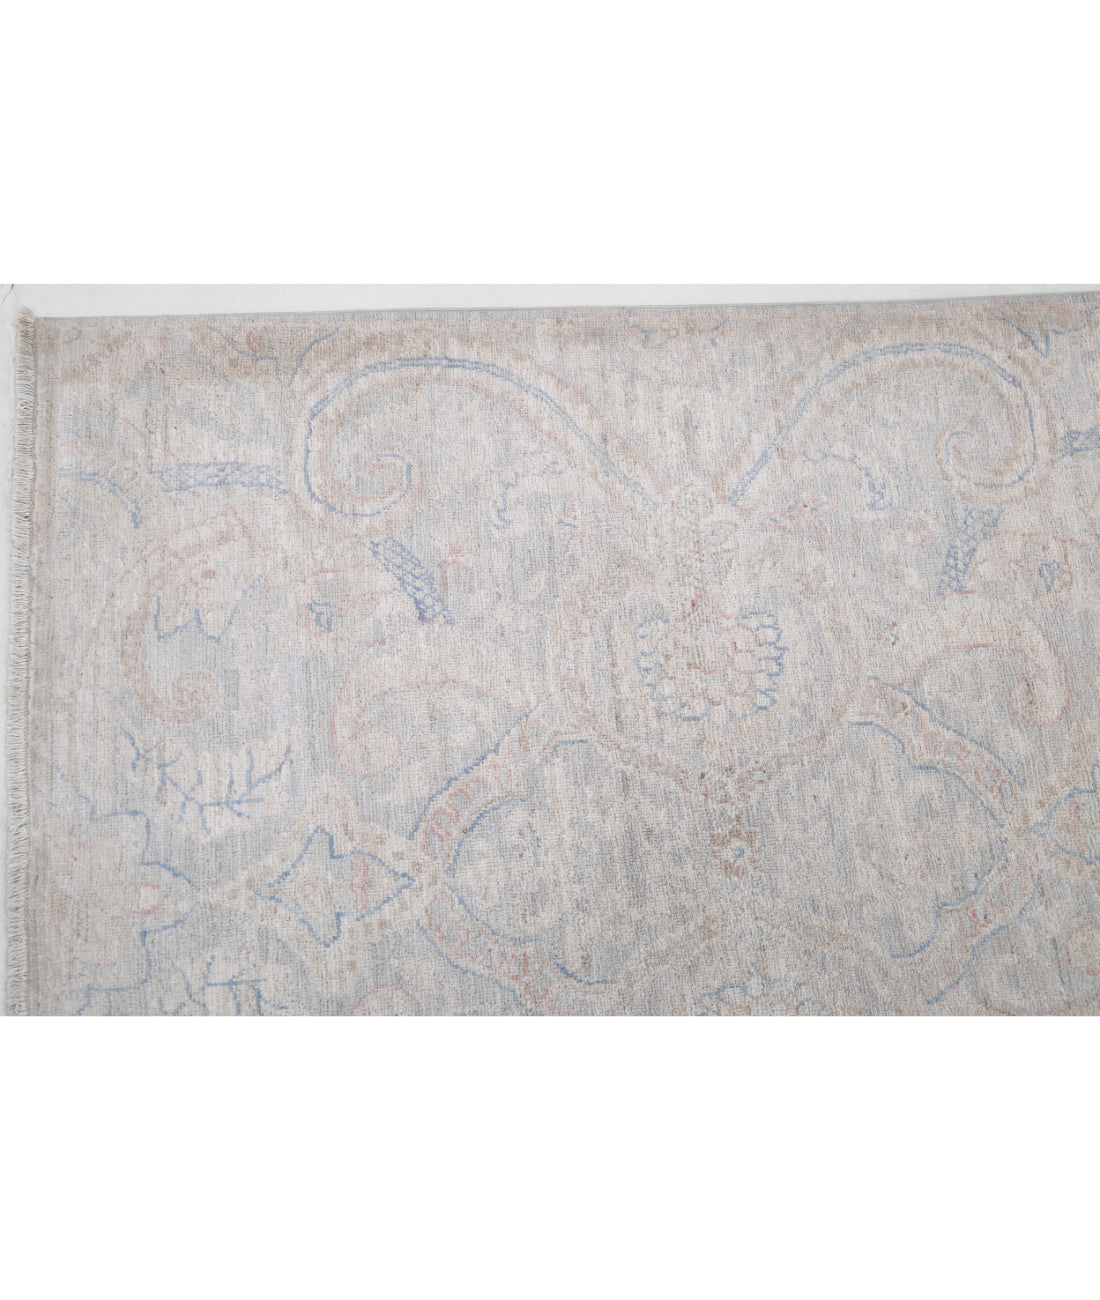 Hand Knotted Artemix Wool Rug - 6'1'' x 8'4'' 6'1'' x 8'4'' (183 X 250) / Grey / Blue